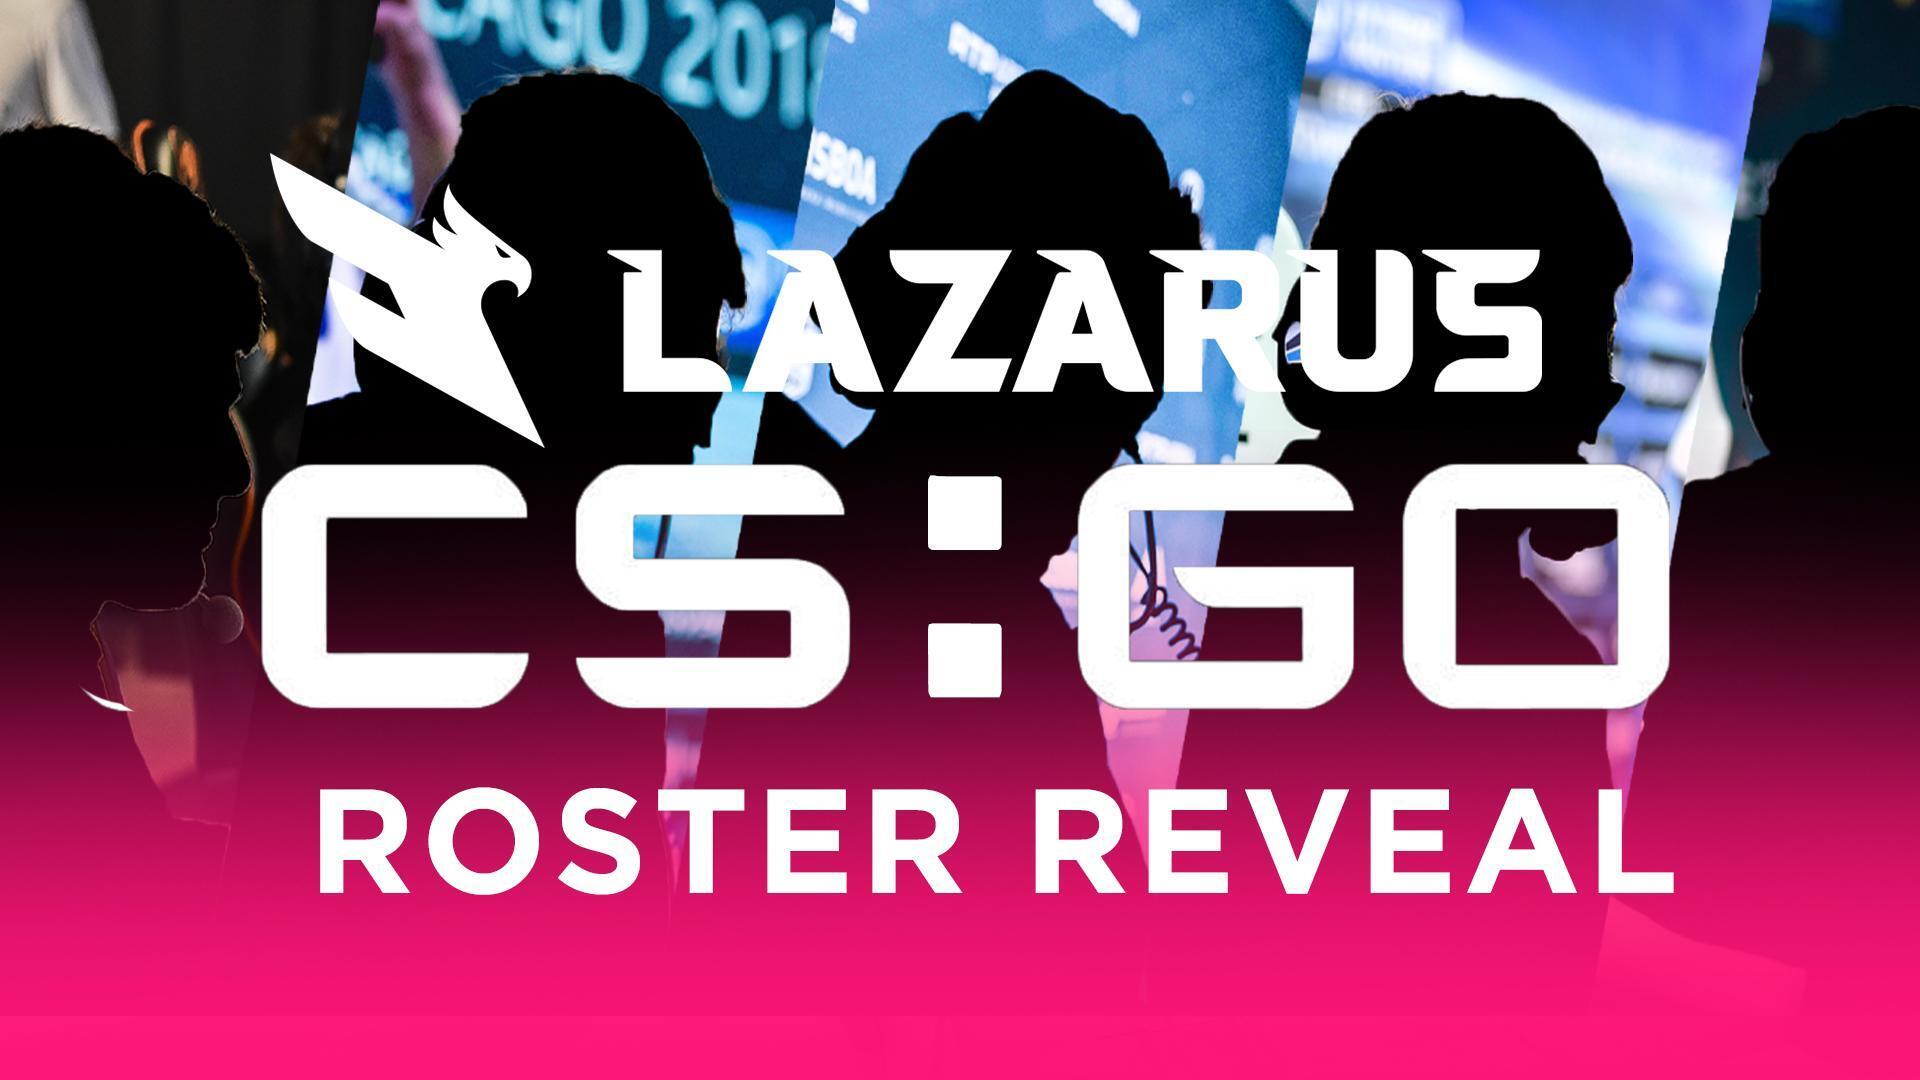 Lazarus Esports announces they've picked up the CS:GO Swole Patrol roster. (Image courtesy of Lazarus Esports)